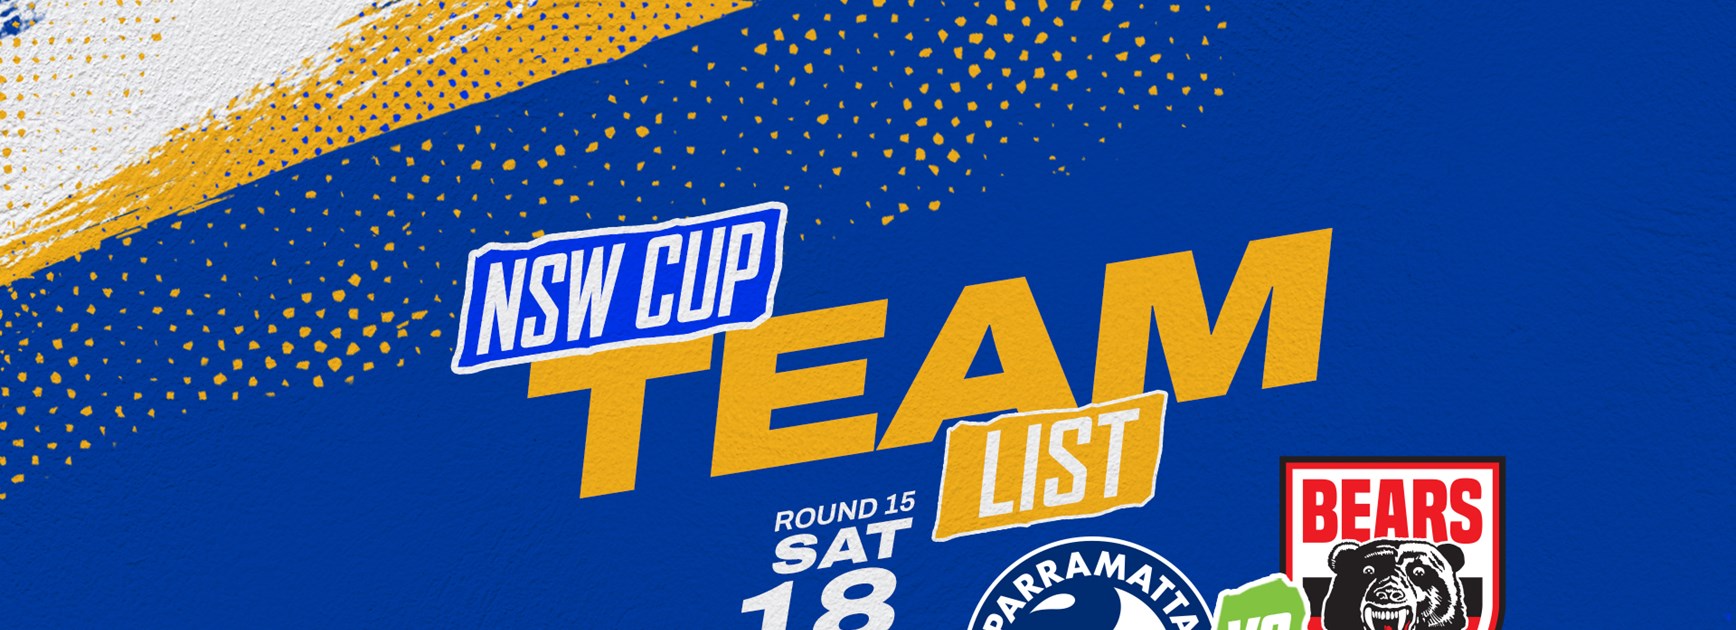 NSW Cup Team List - Eels v Bears, Round 15